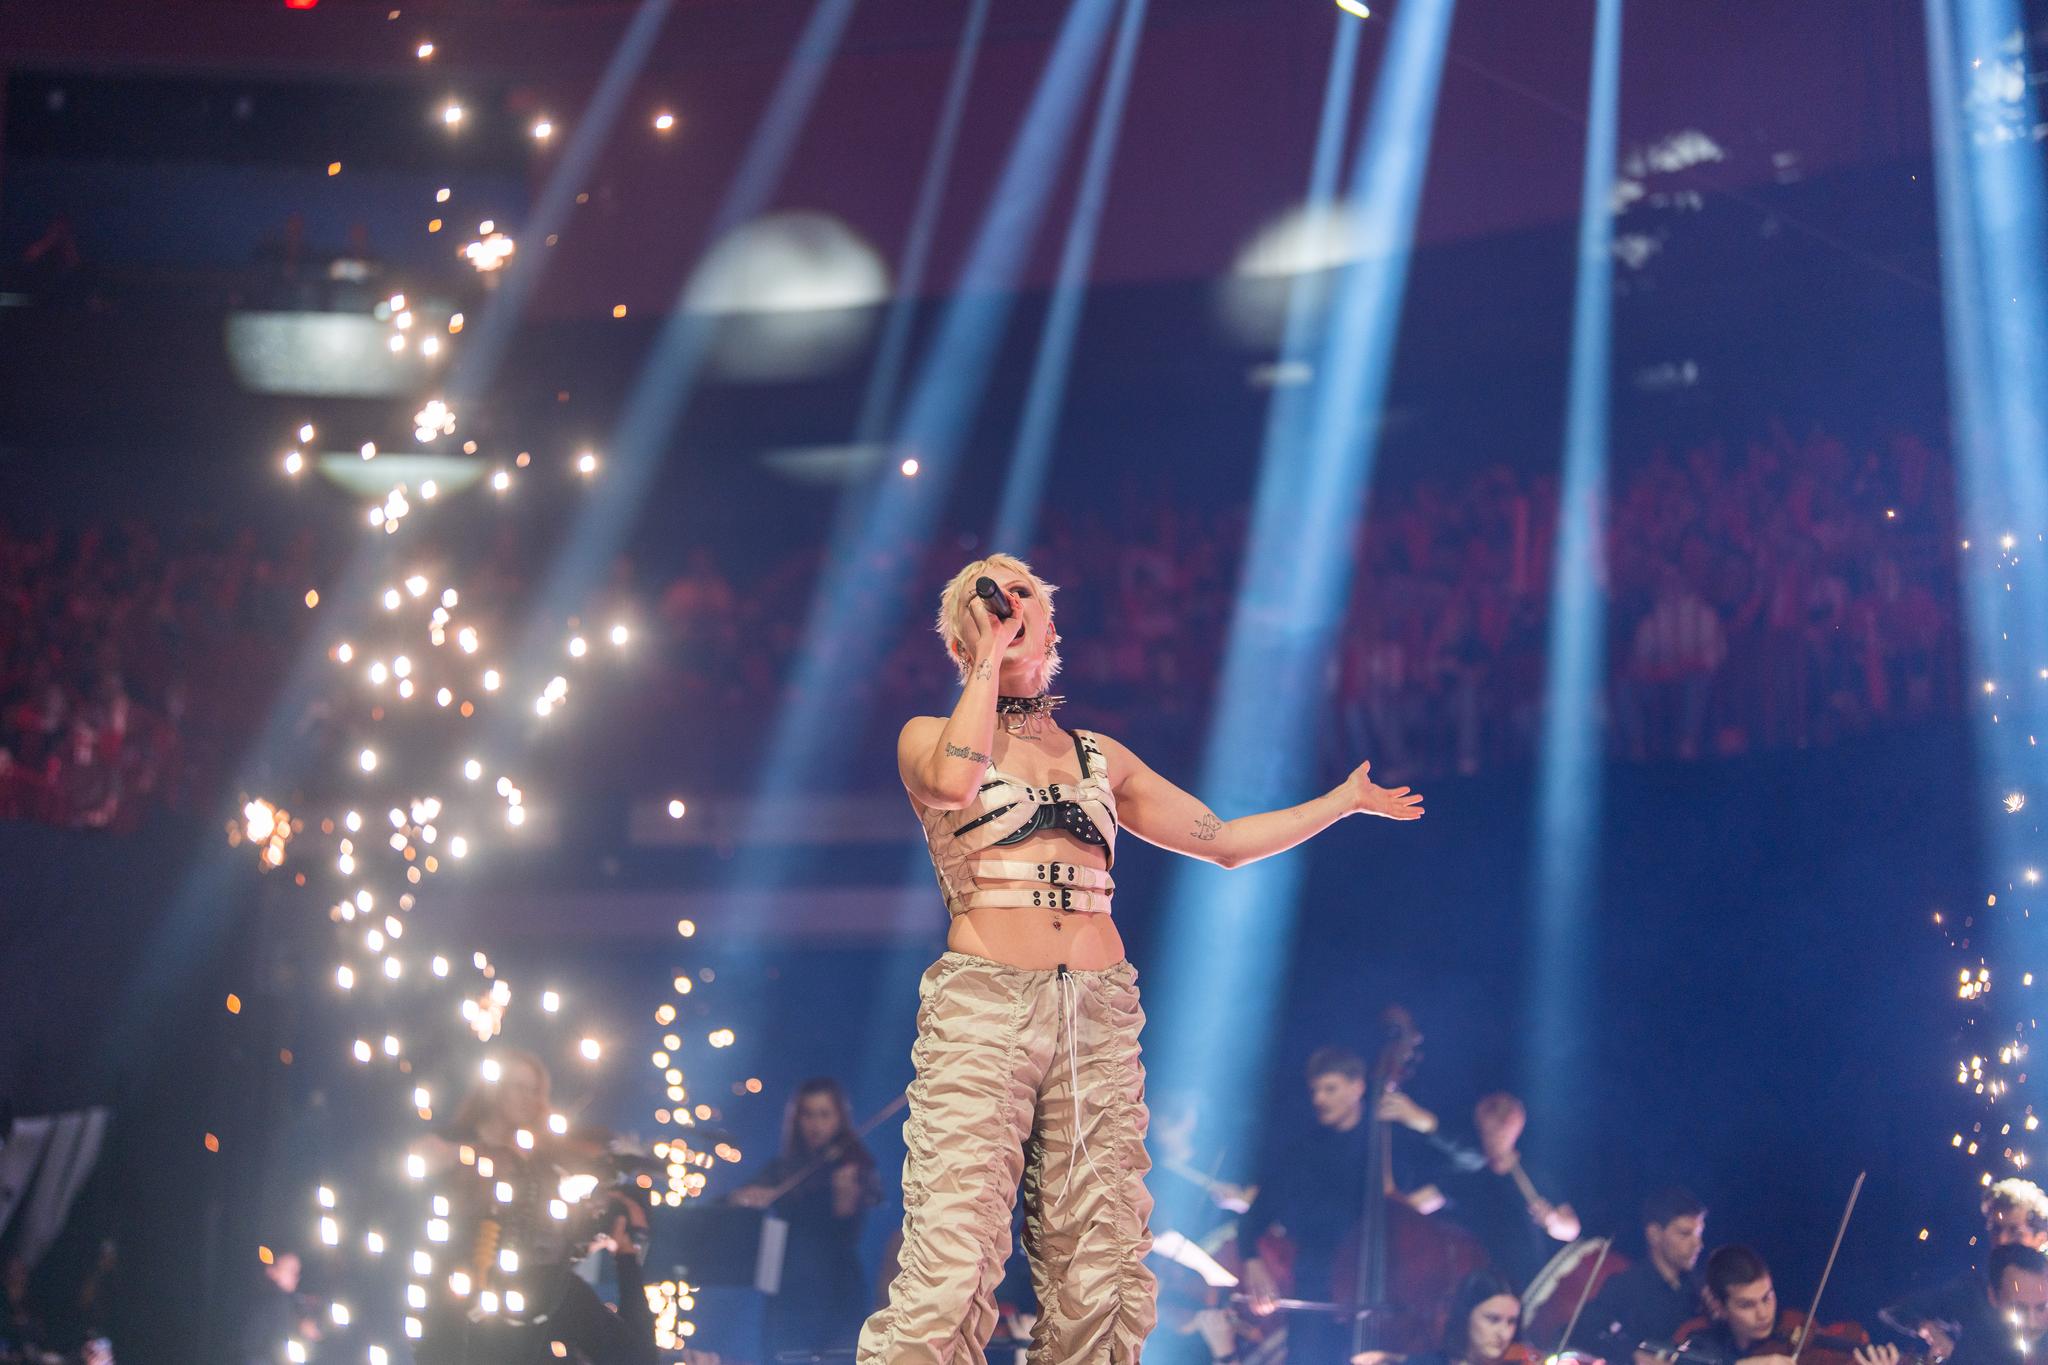 The singer Cassyette performs on stage accompanied by an orchestra and framed by sparks of pyrotechnics.